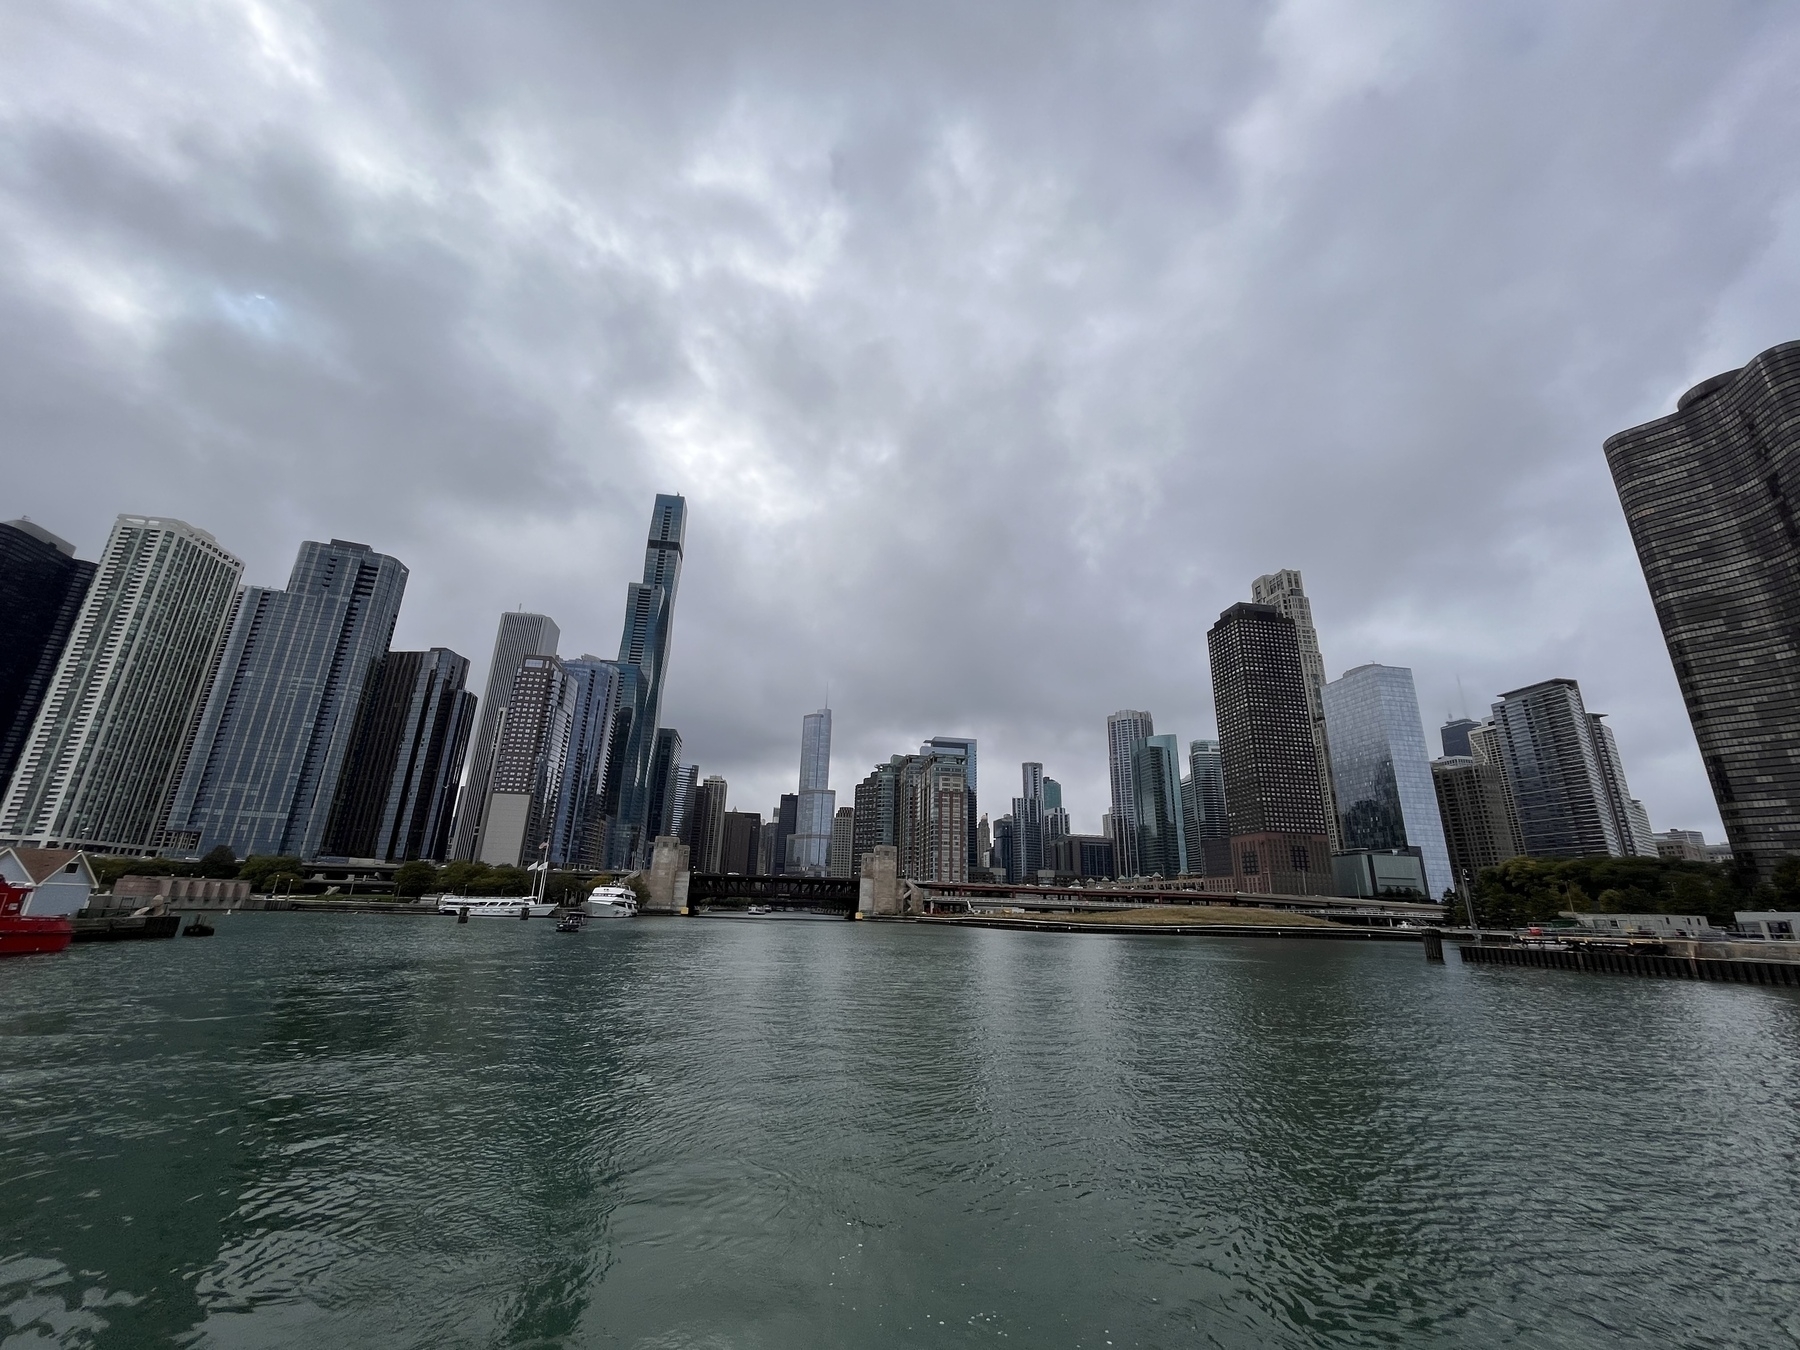 The Chicago skyline taken from the water. Stormy skies loom overhead. 